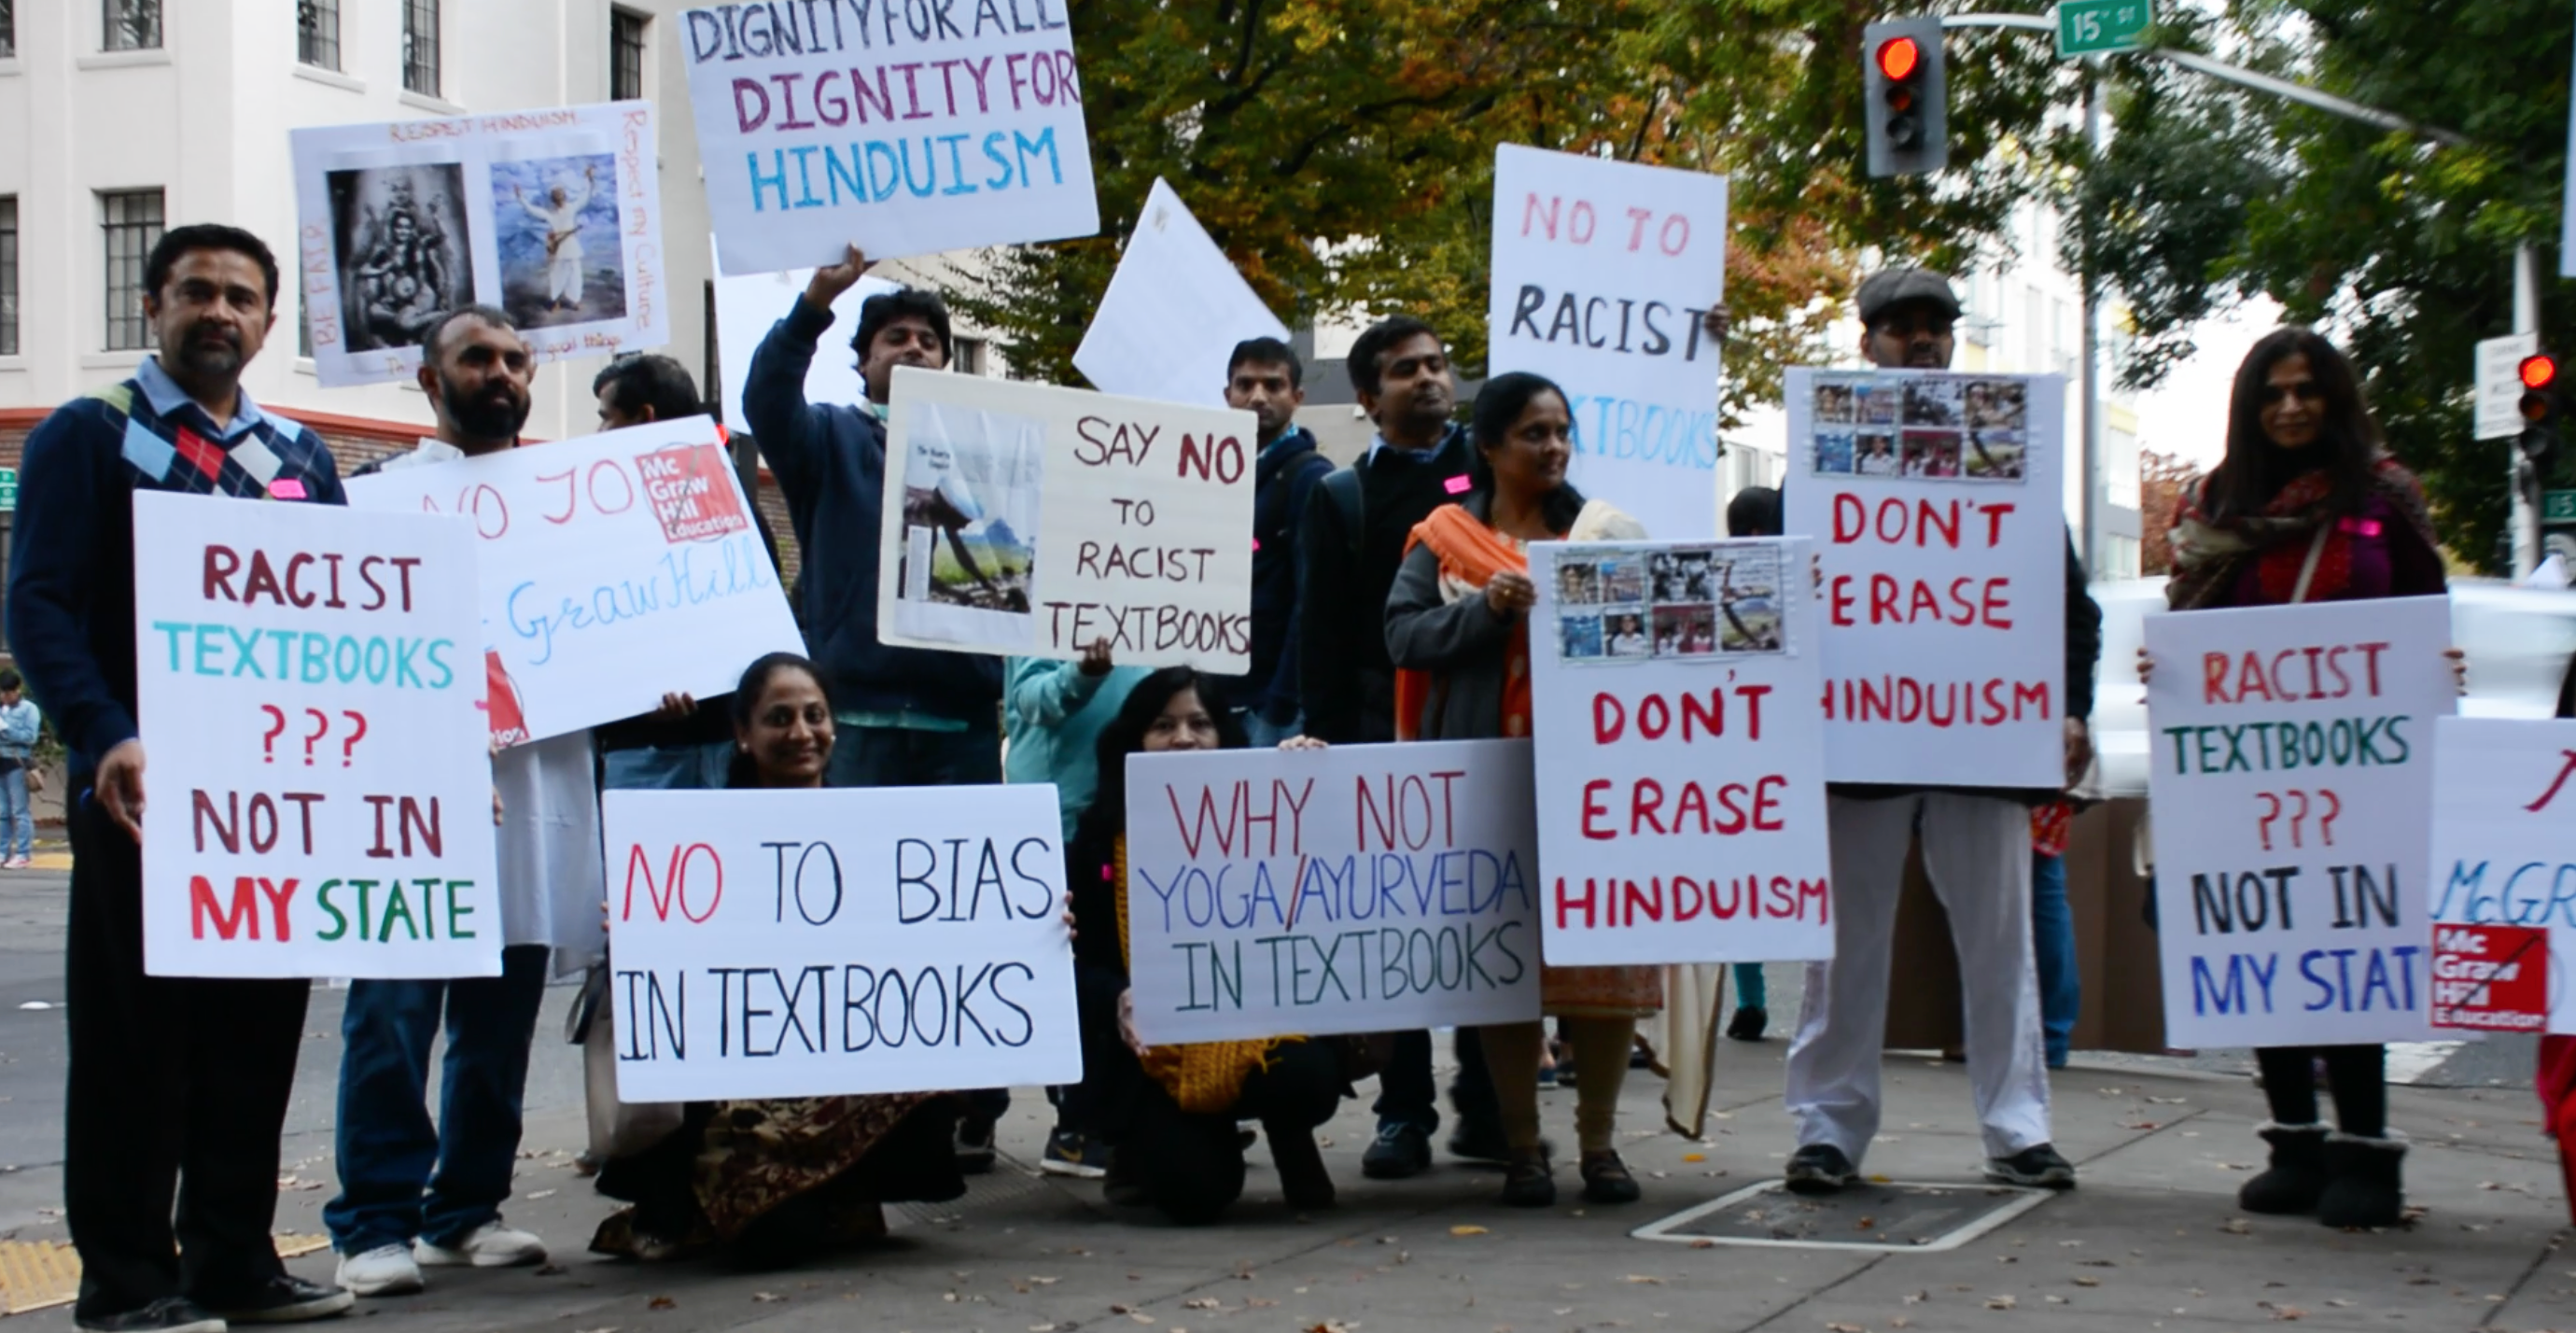 Hindu American students say no to stereotypes and successfully change textbooks